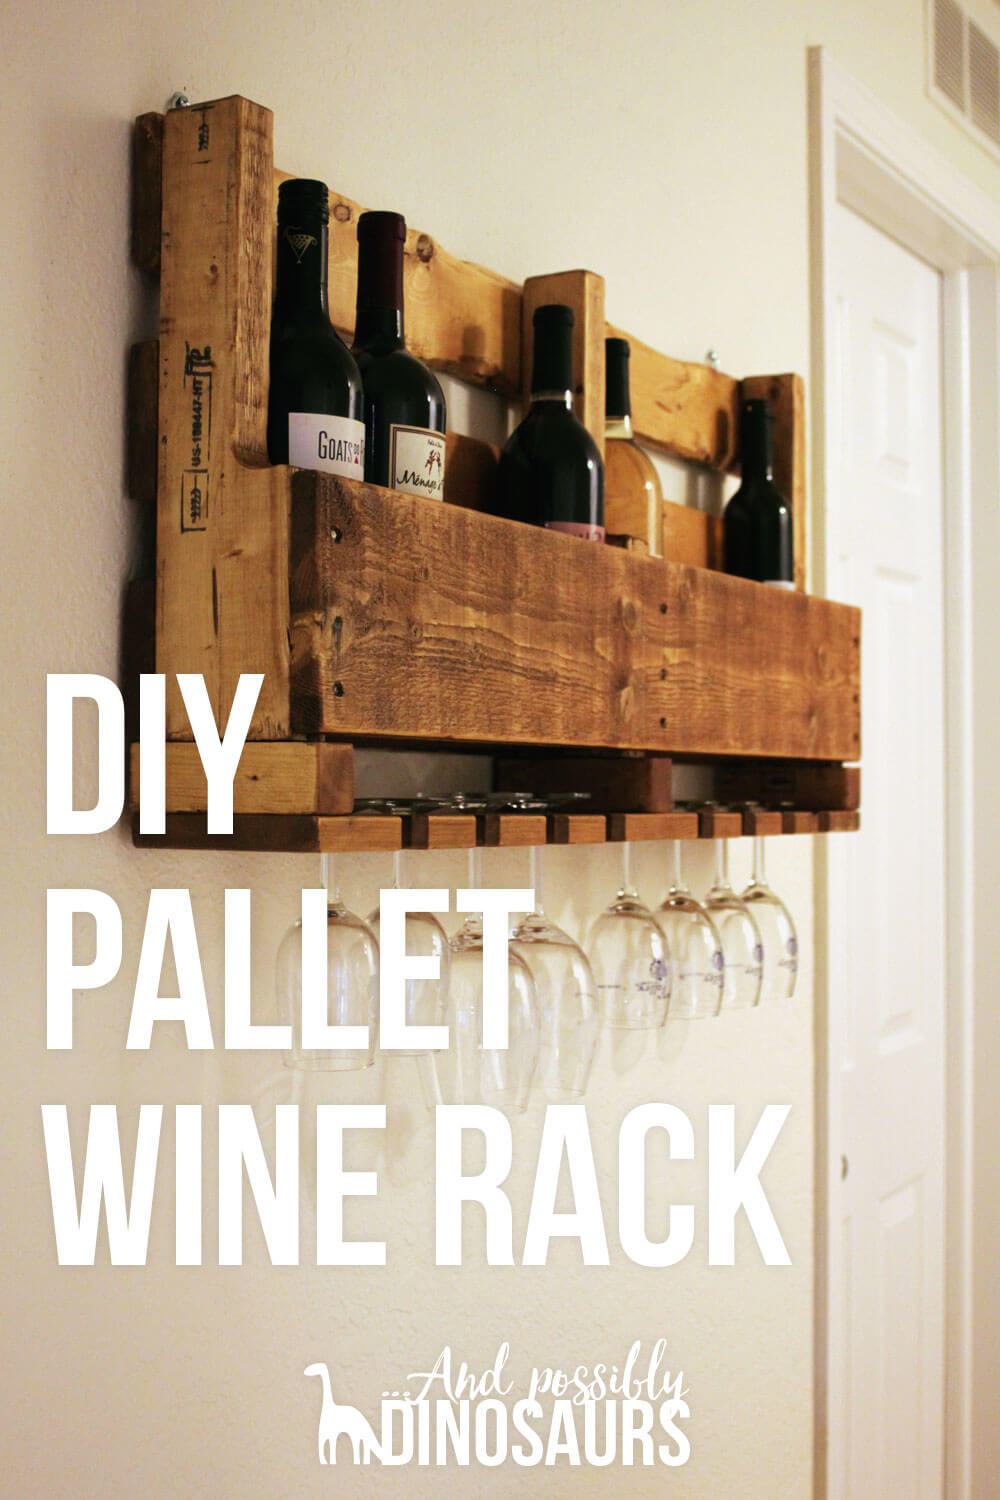 Best ideas about DIY Pallet Wine Racks
. Save or Pin DIY Wine Rack from a Pallet And Possibly Dinosaurs Now.